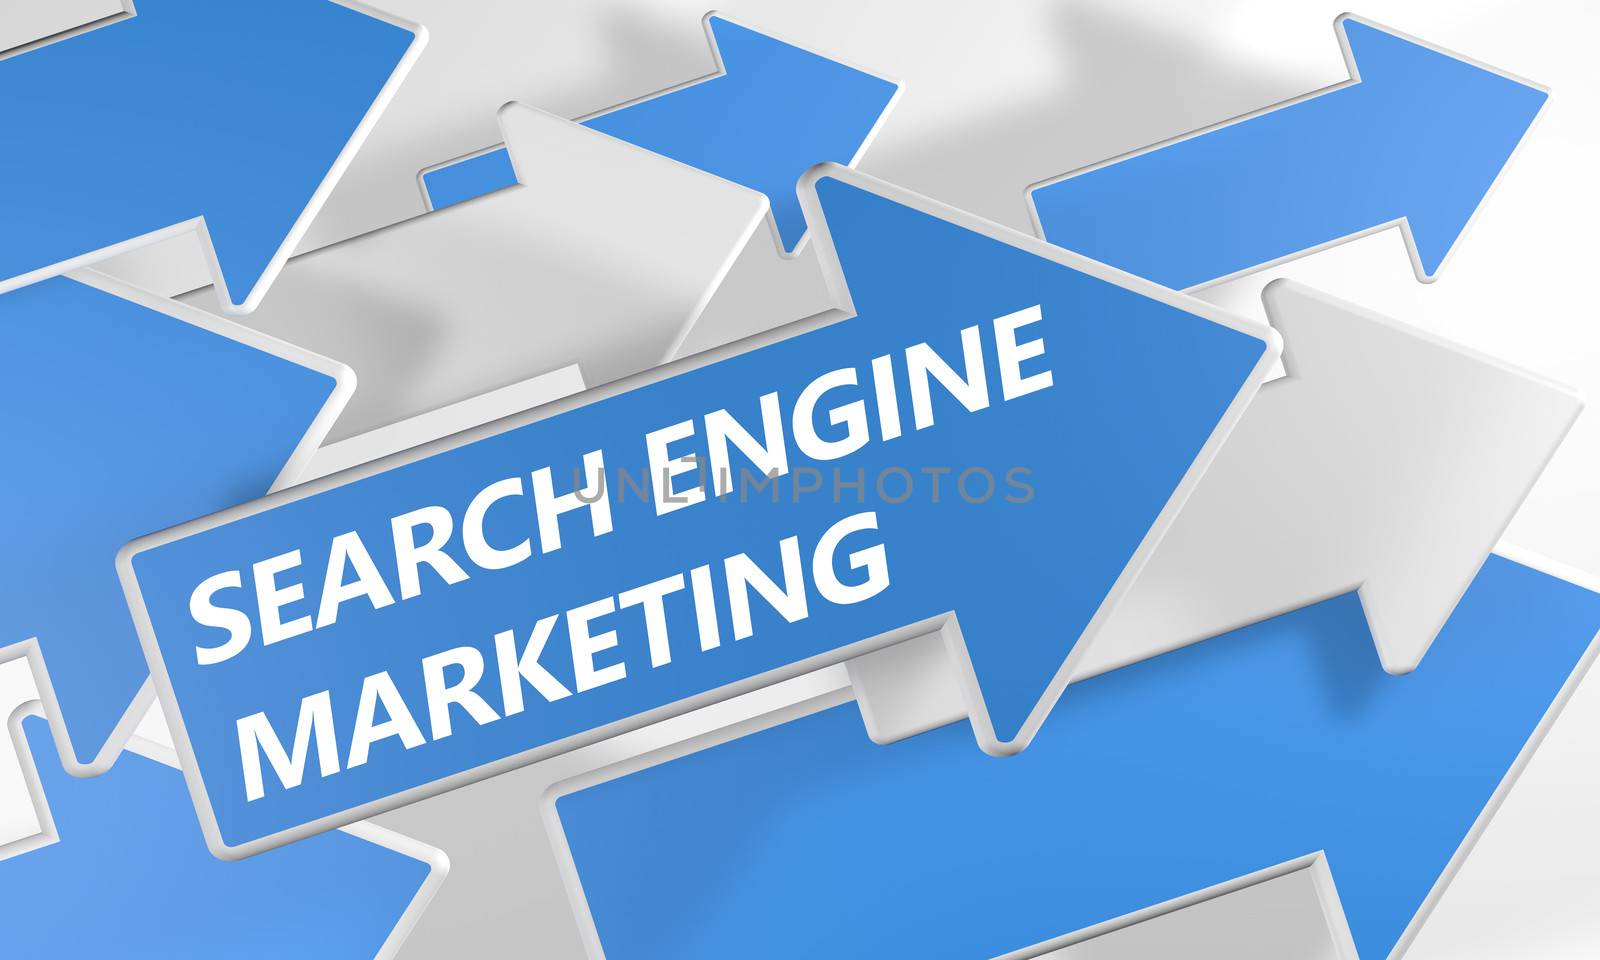 Search Engine Marketing 3d render concept with blue and white arrows flying upwards over a white background.